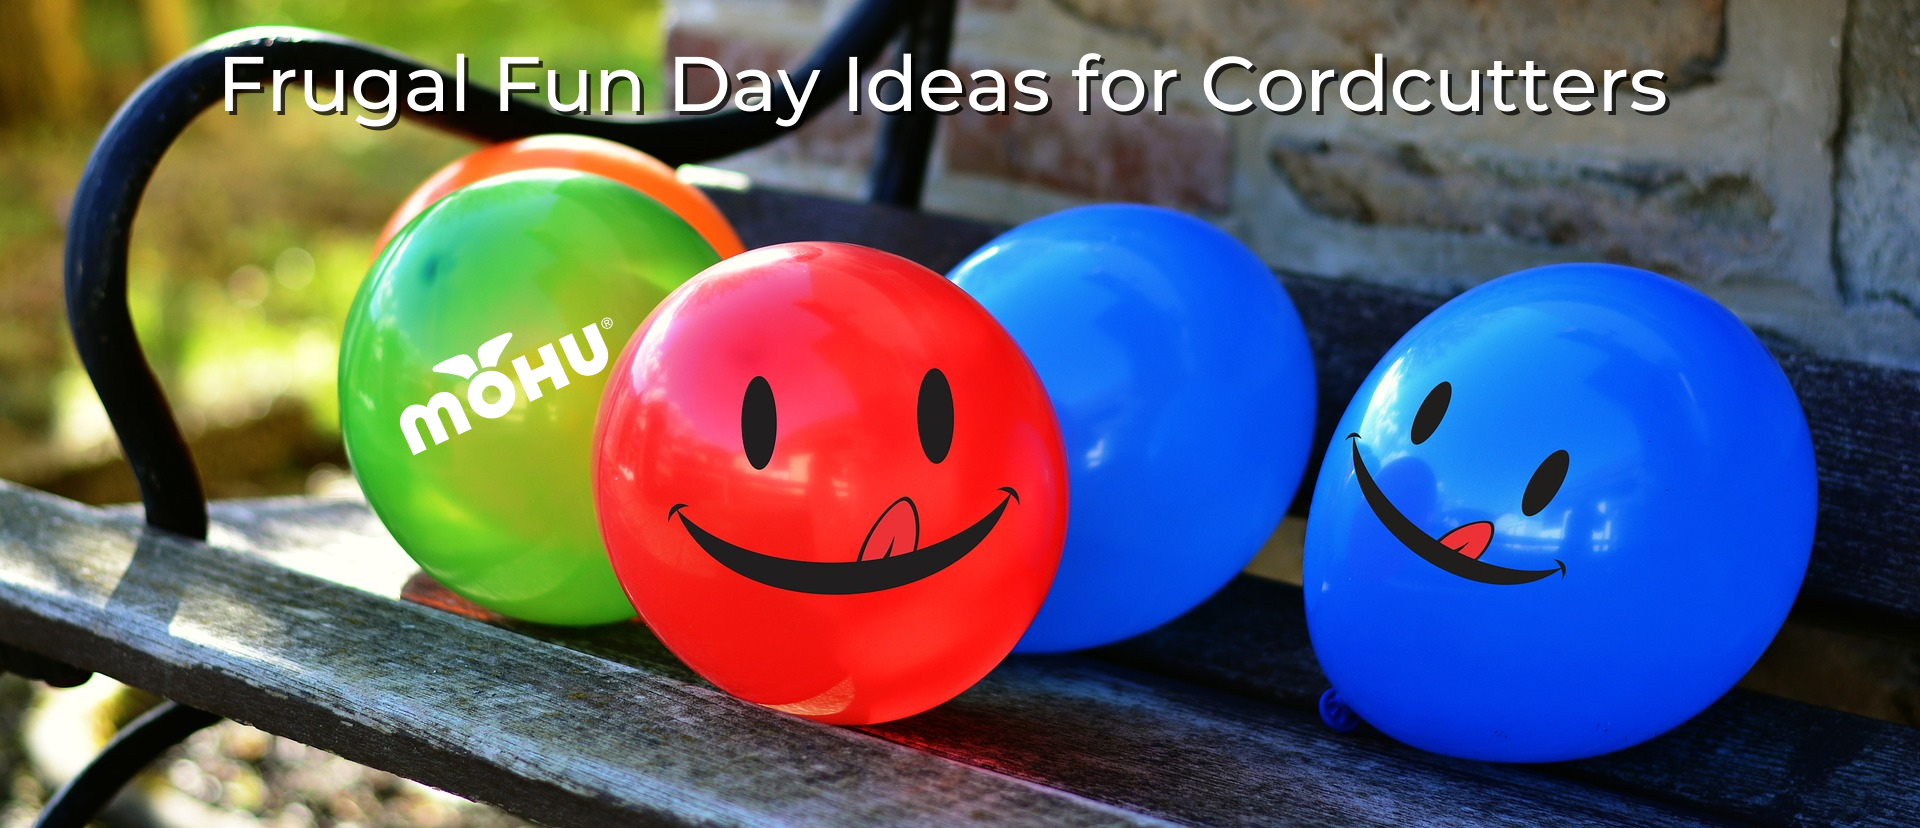 Smiley face balloons on a bench, Frugal Fun Day Ideas for Cordcutters